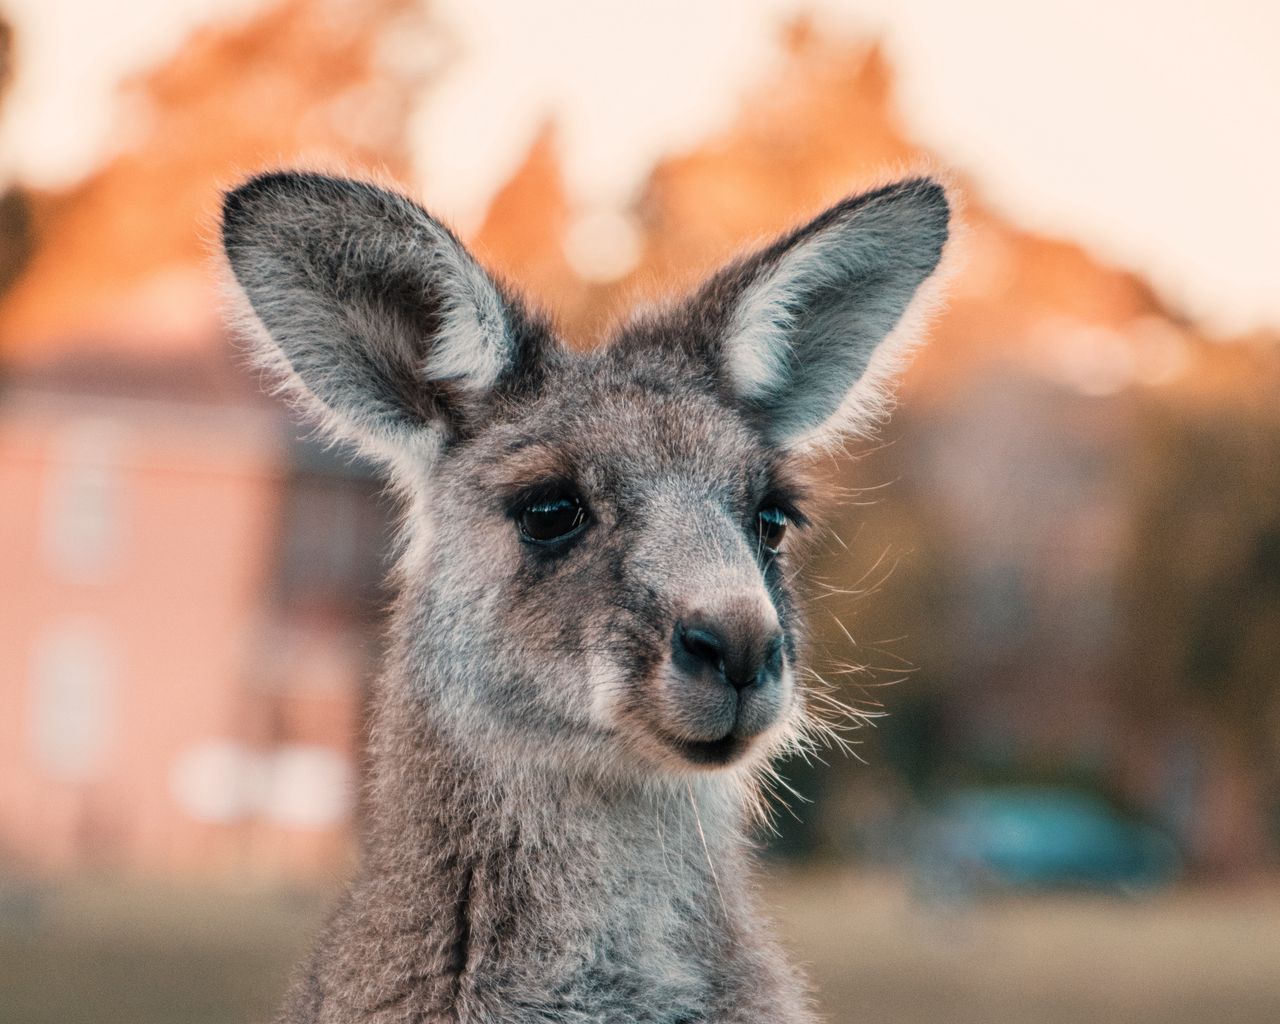 60+ Australia wallpapers HD | Download Free backgrounds